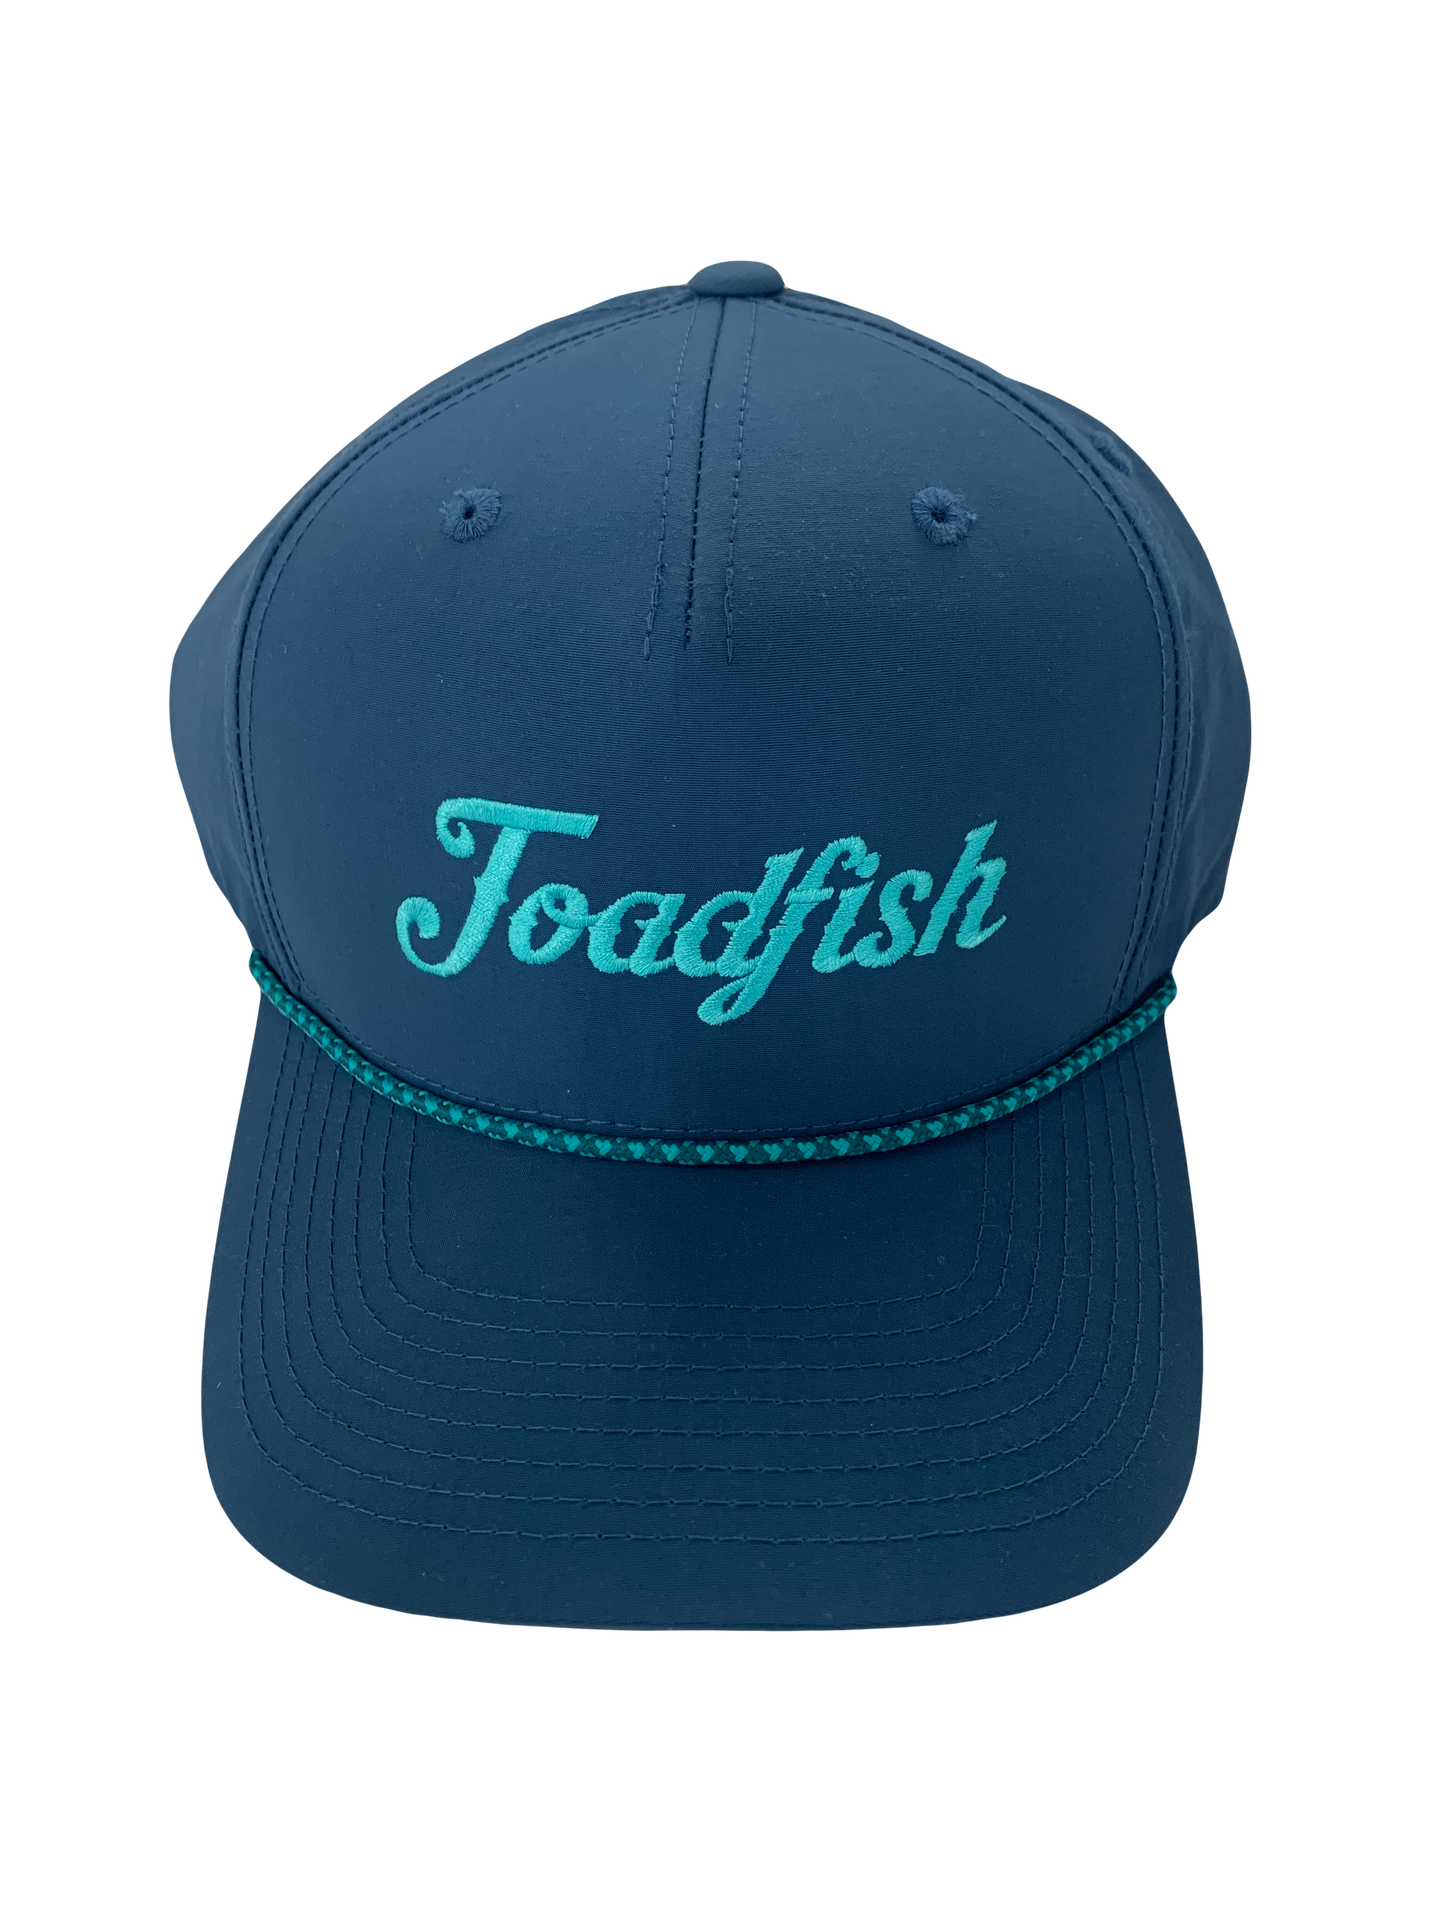 Toadfish Outfitters Hats